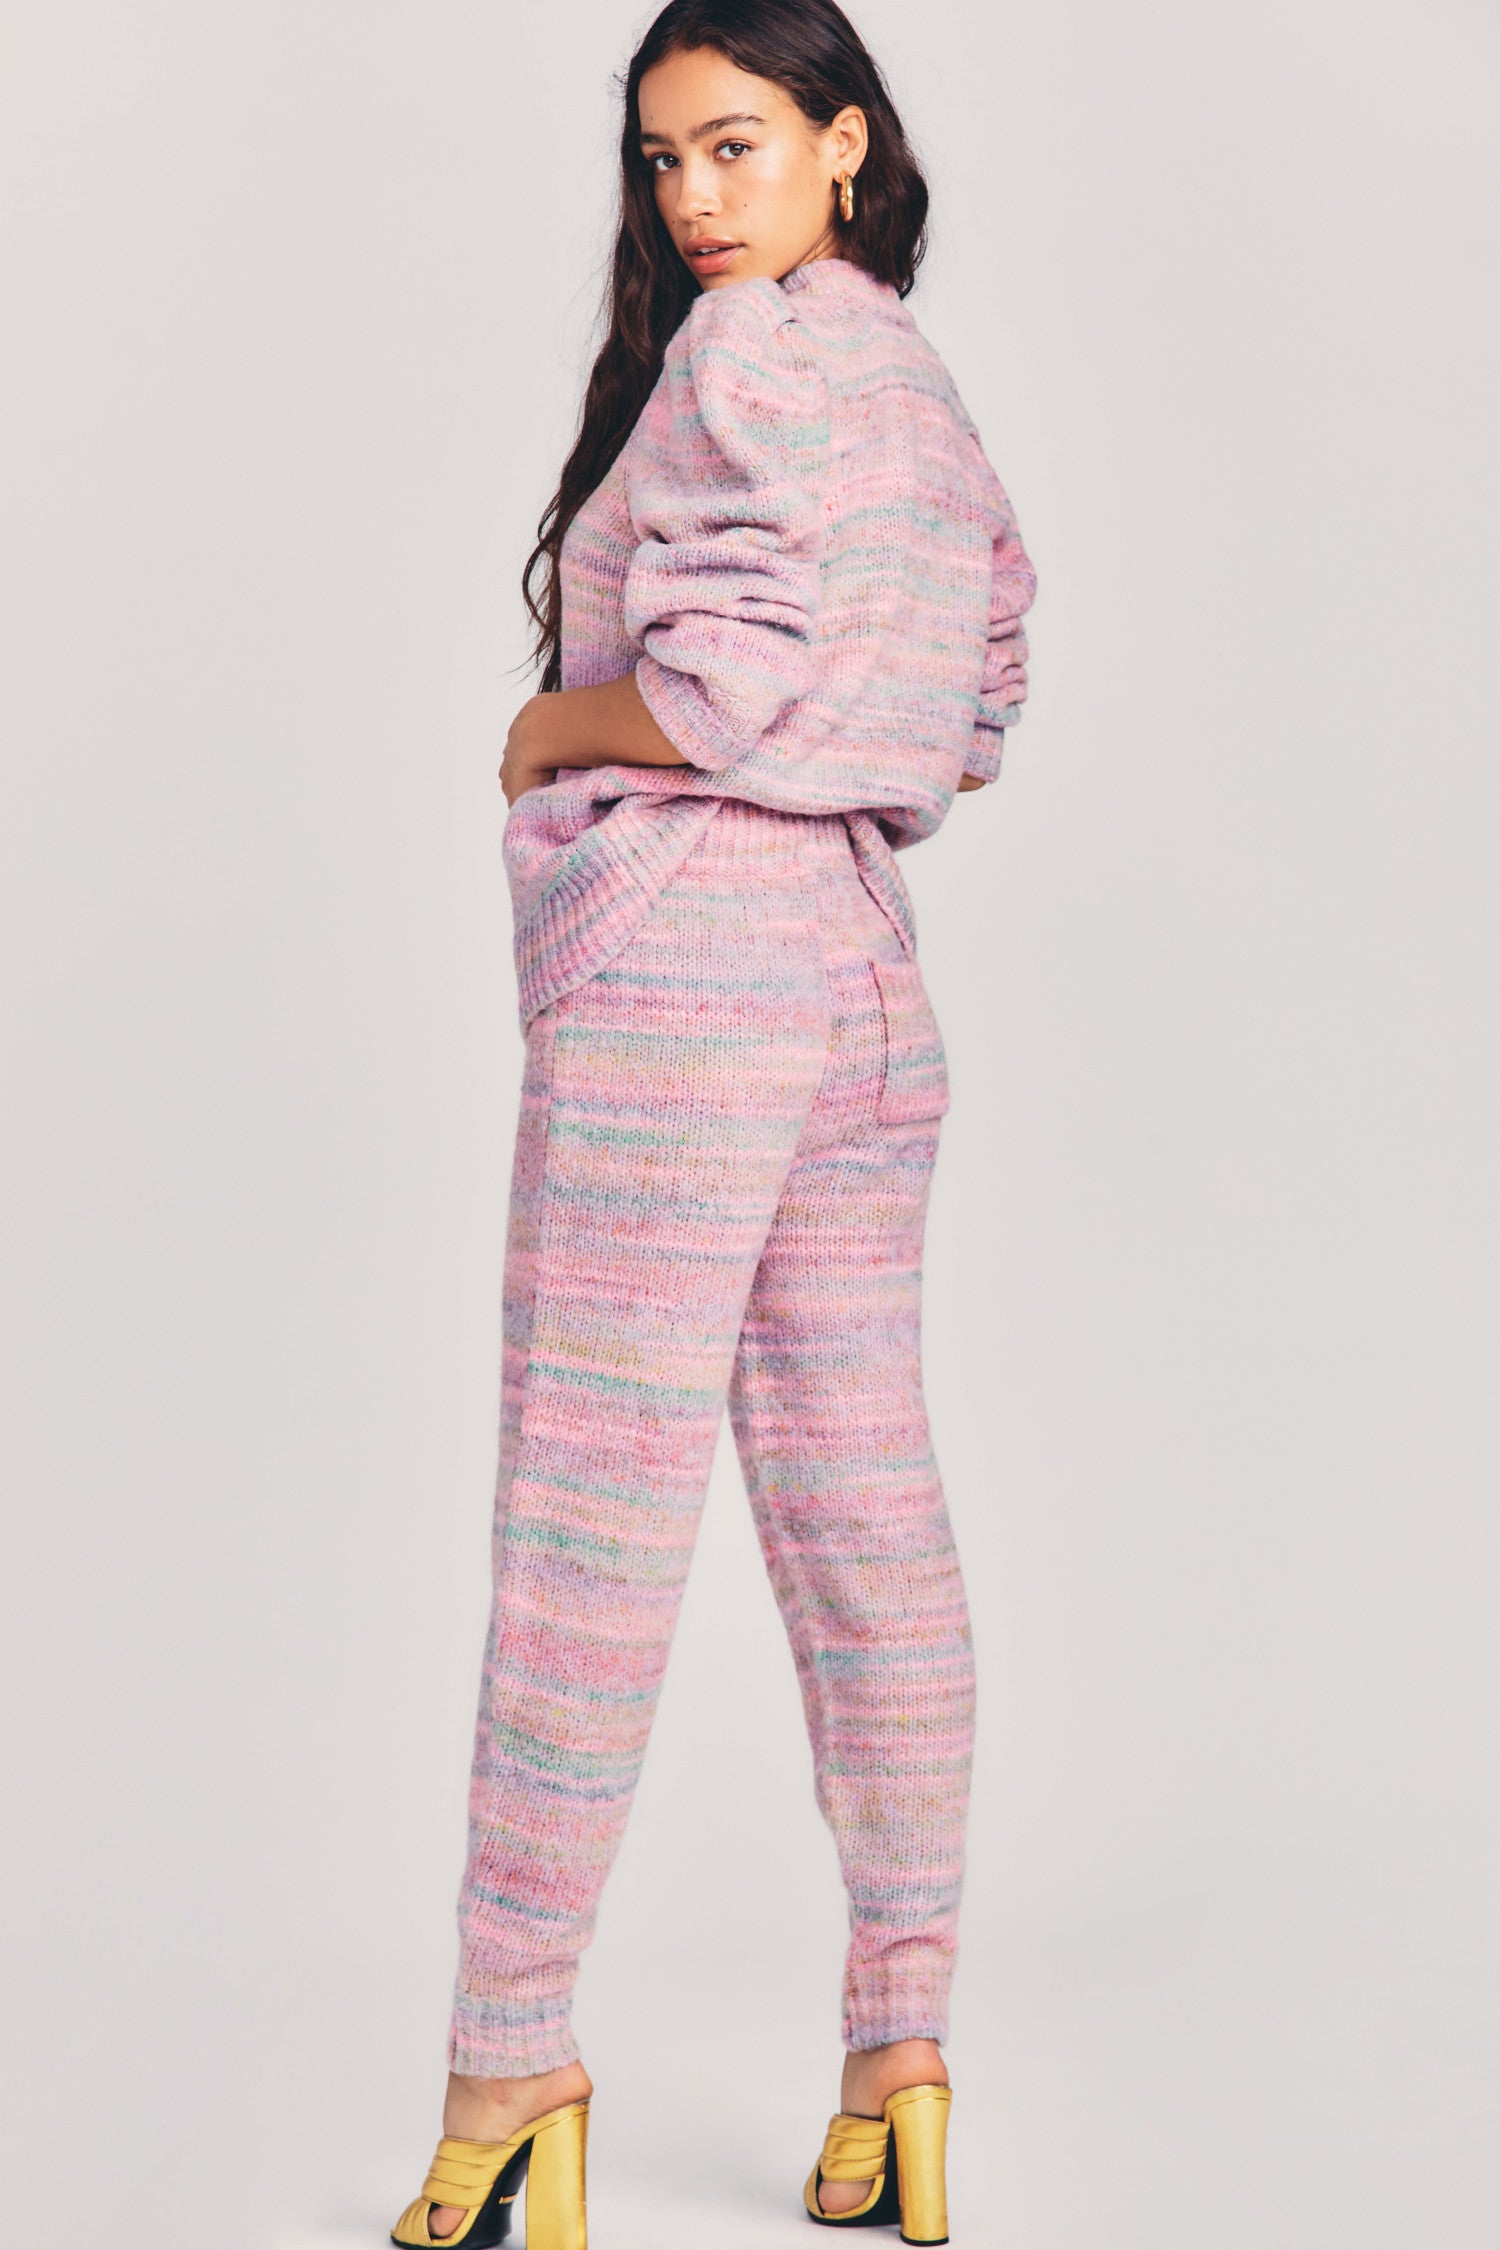 Women's wool blend knit jogger pant in multicolored pinky pastels 